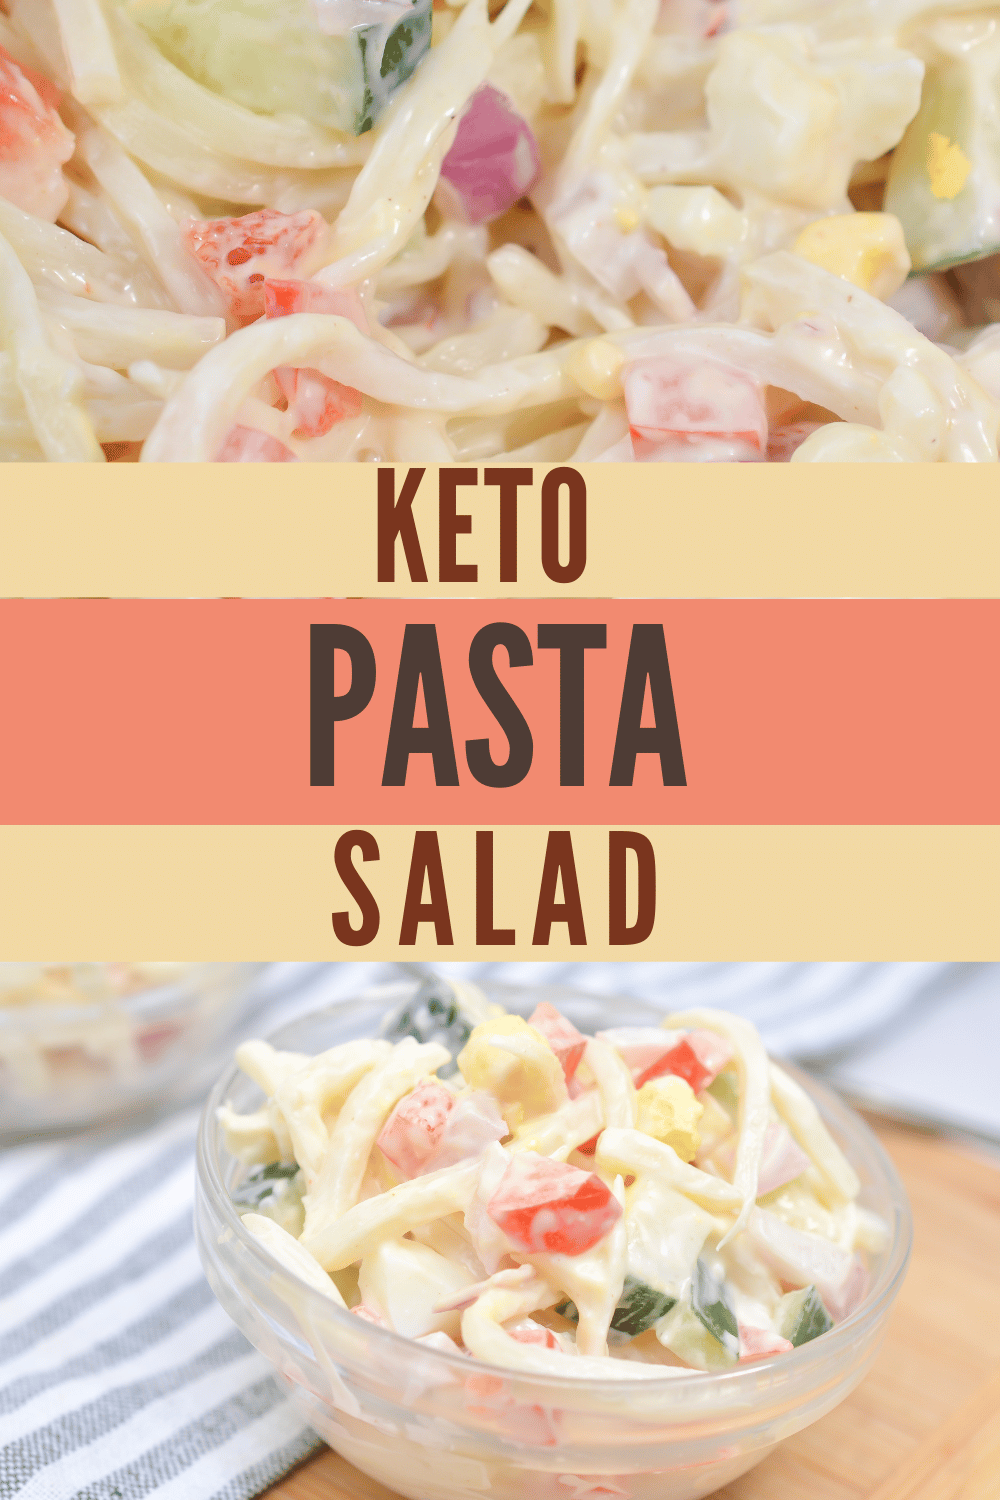 This Keto Pasta Salad recipe is easy to make and is packed with flavor! It’s the perfect side dish to bring to any potluck or summer party! #ketopastasalad #keto #lowcarb #pastasalad via @wondermomwannab